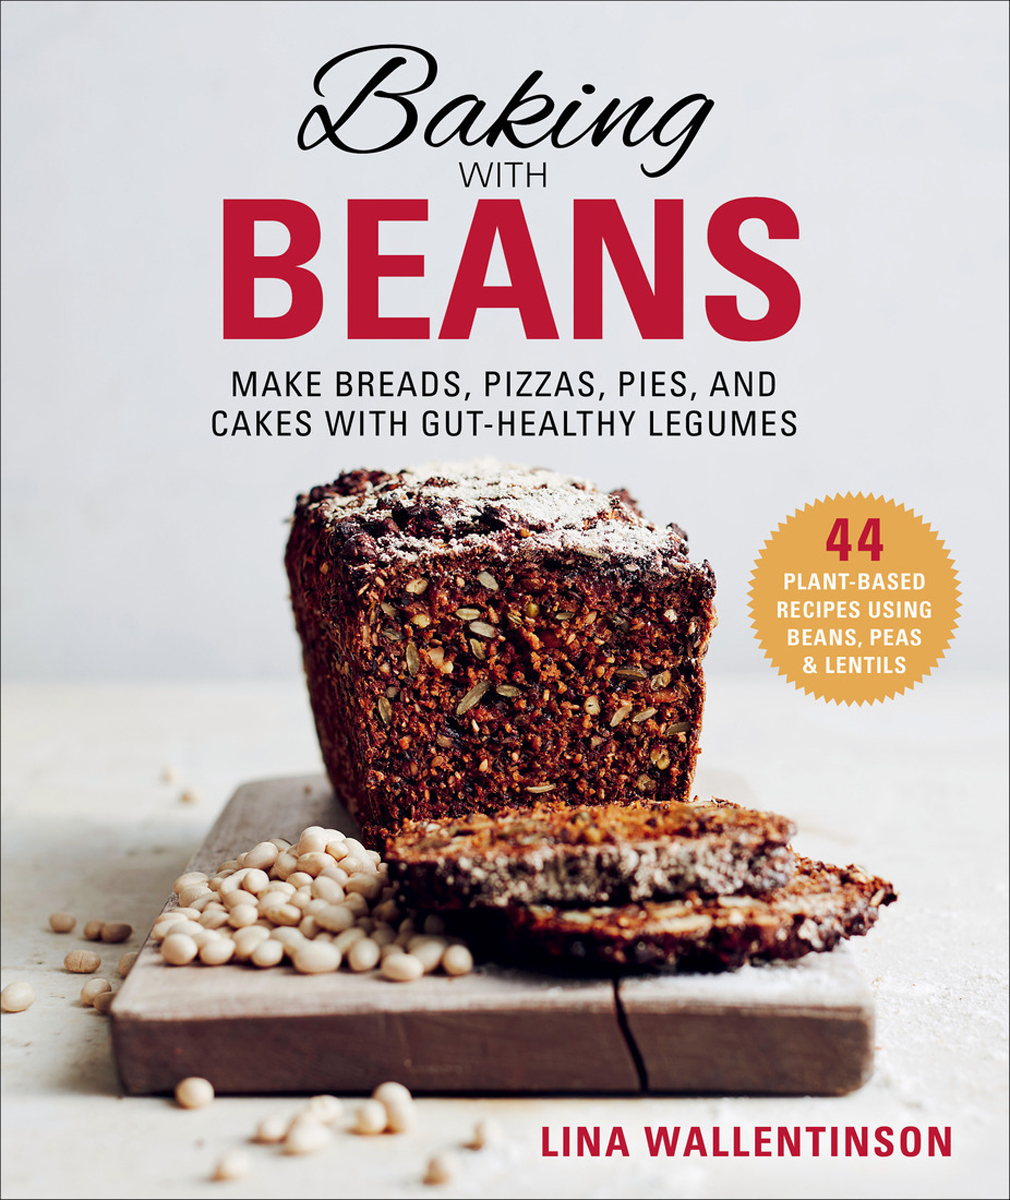 Baking with Beans Make Breads Pizzas Pies and Cakes with Gut-Healthy Legumes - photo 1